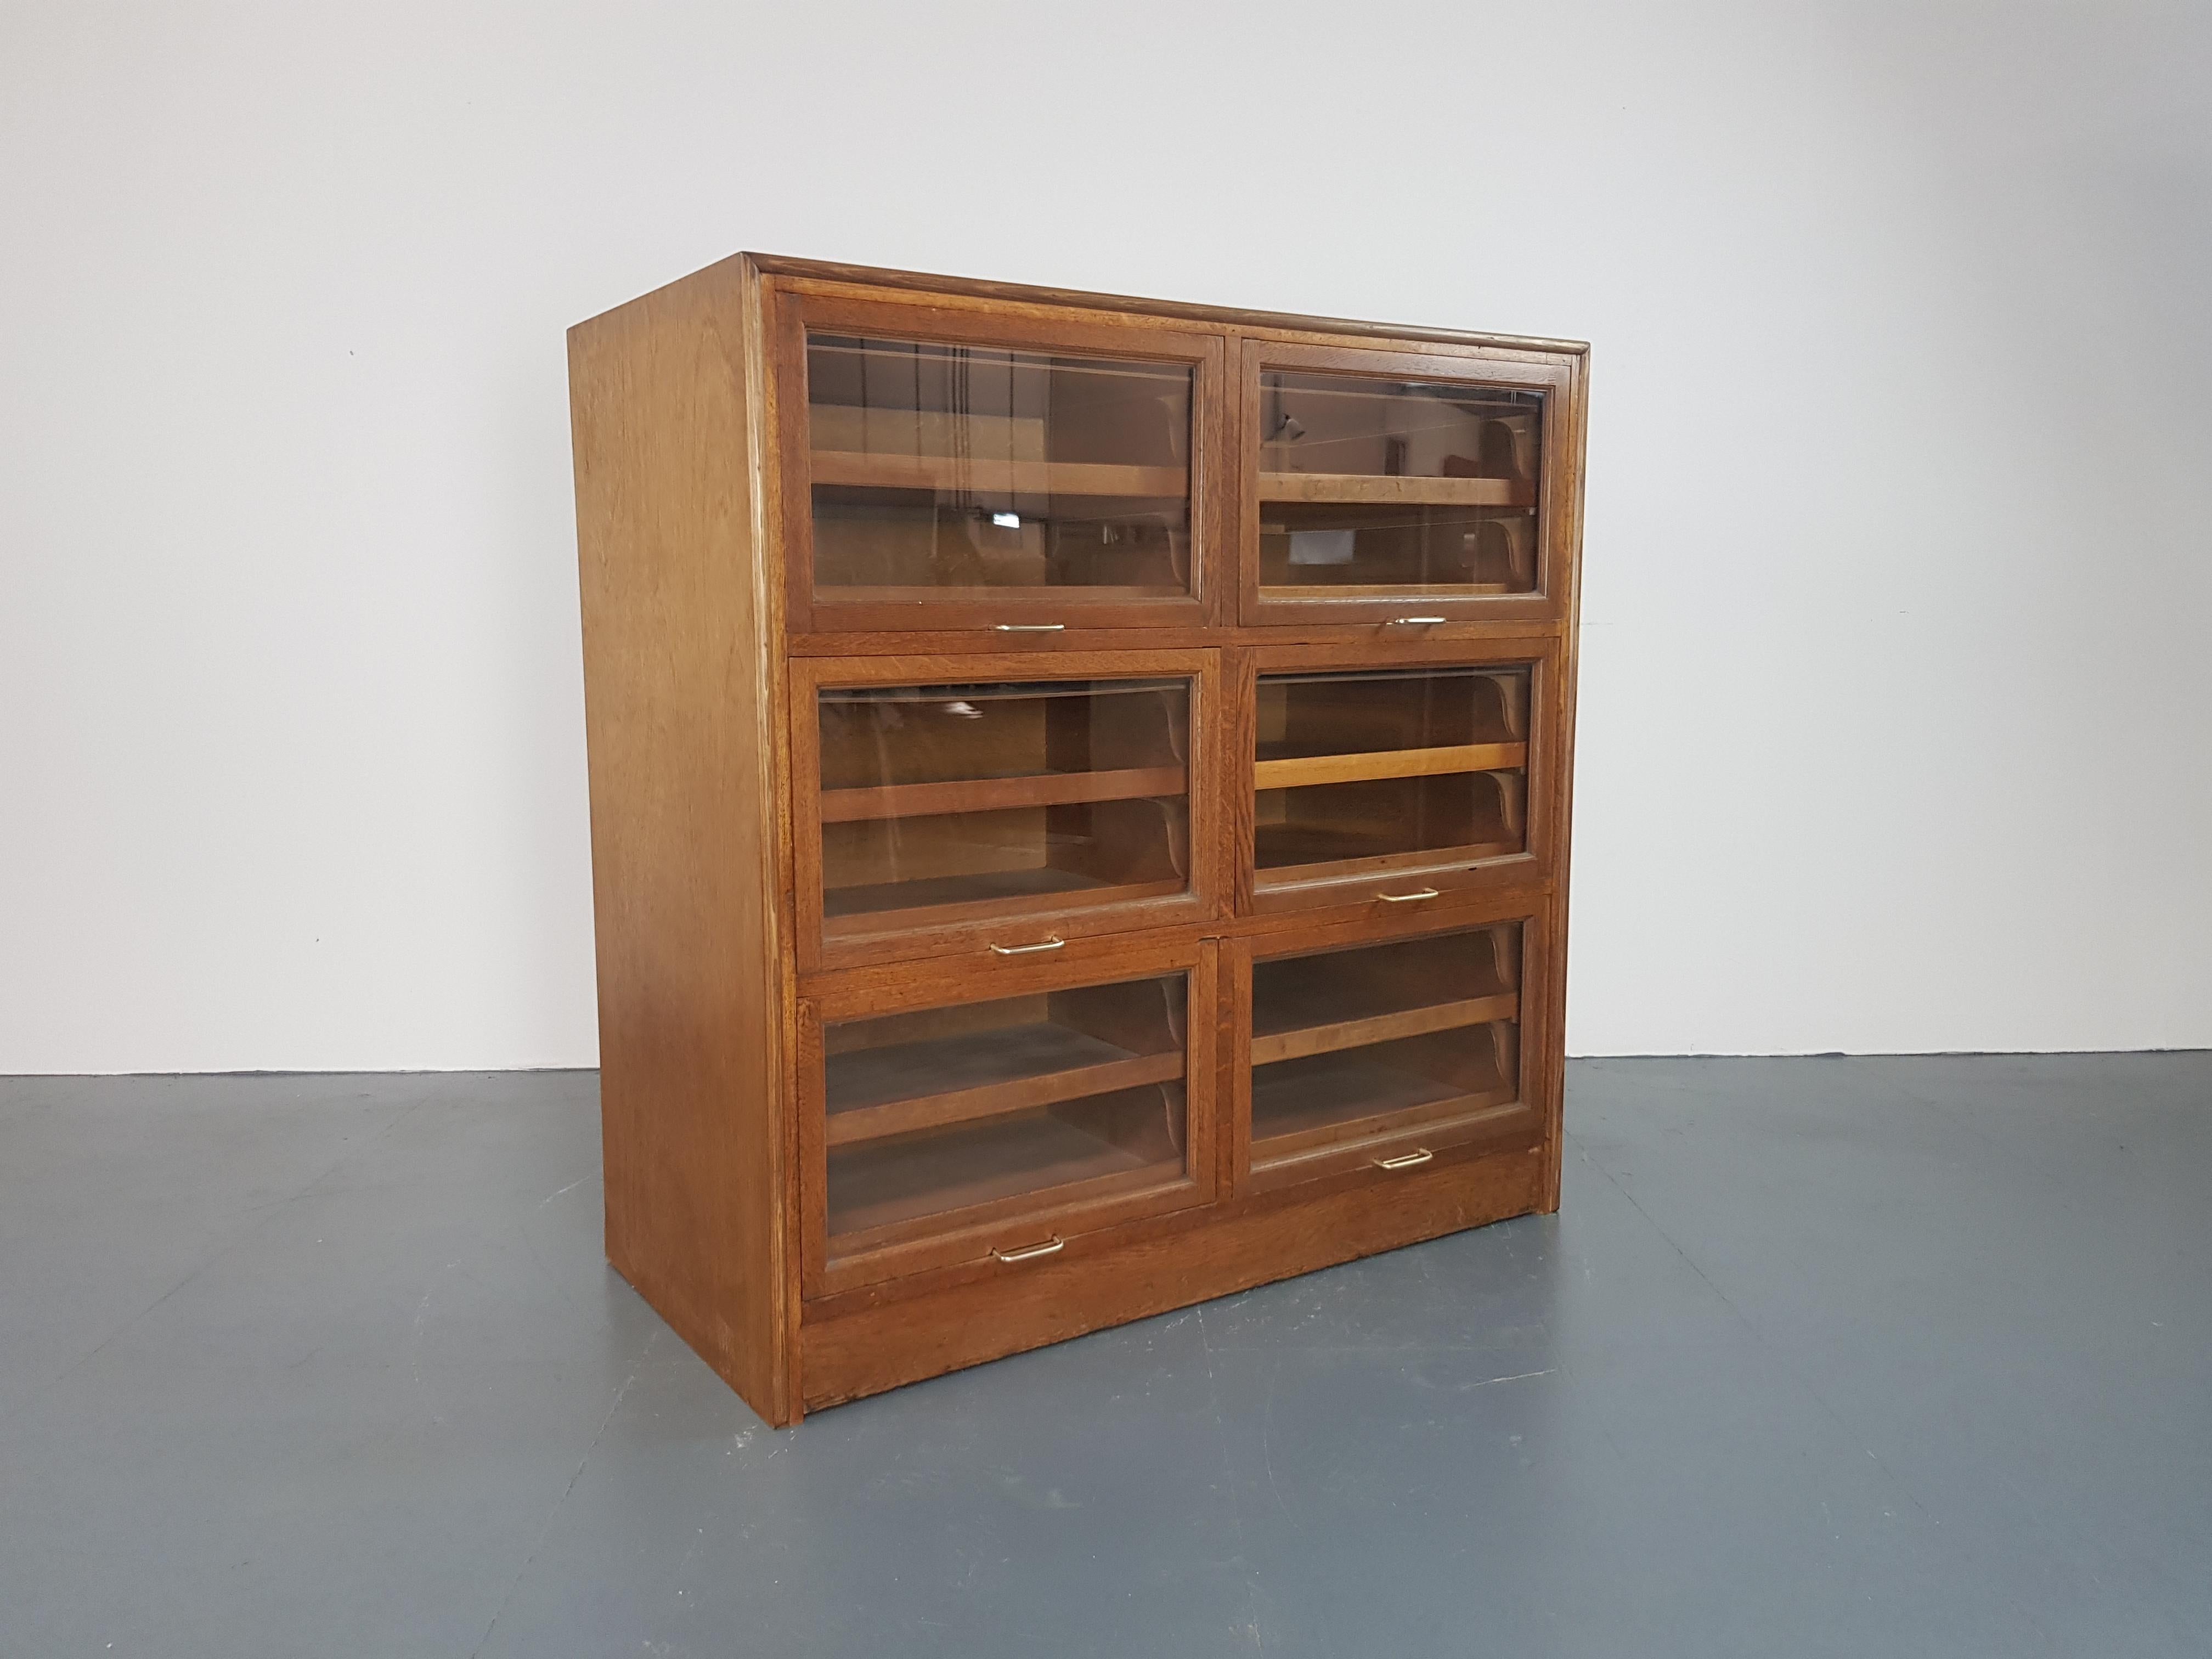 Very lovely 6-section haberdashery cabinet from the early part of the last century.  Each section has glass fronted up and over doors, with 2 pull out wooden drawers in each.  
In good vintage condition. Some scuffs here and there, as to be